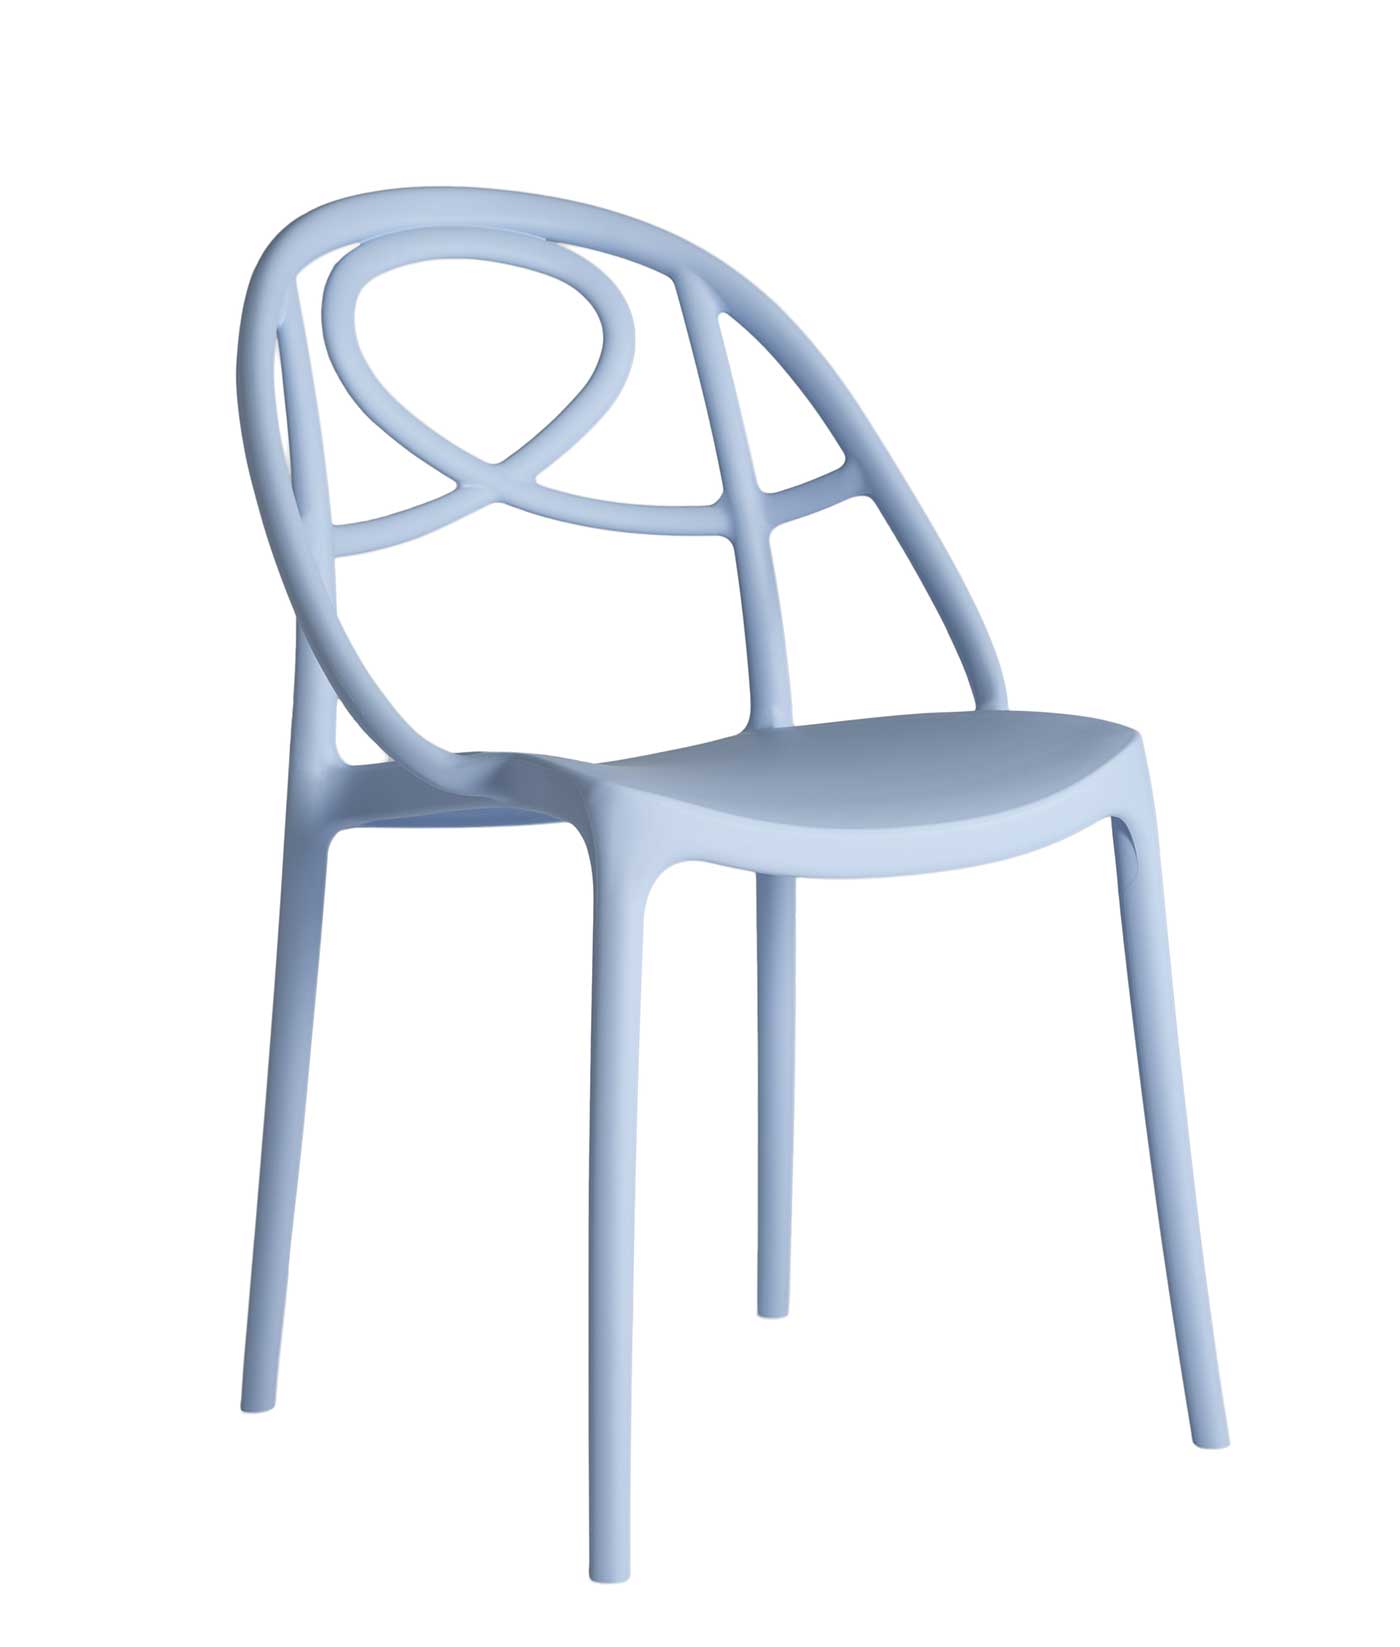 Arabesque is a polypropylene chair entirely handcrafted in Italy. This handcrafted polypropylene chair is perfect for any home, office or outdoor space.